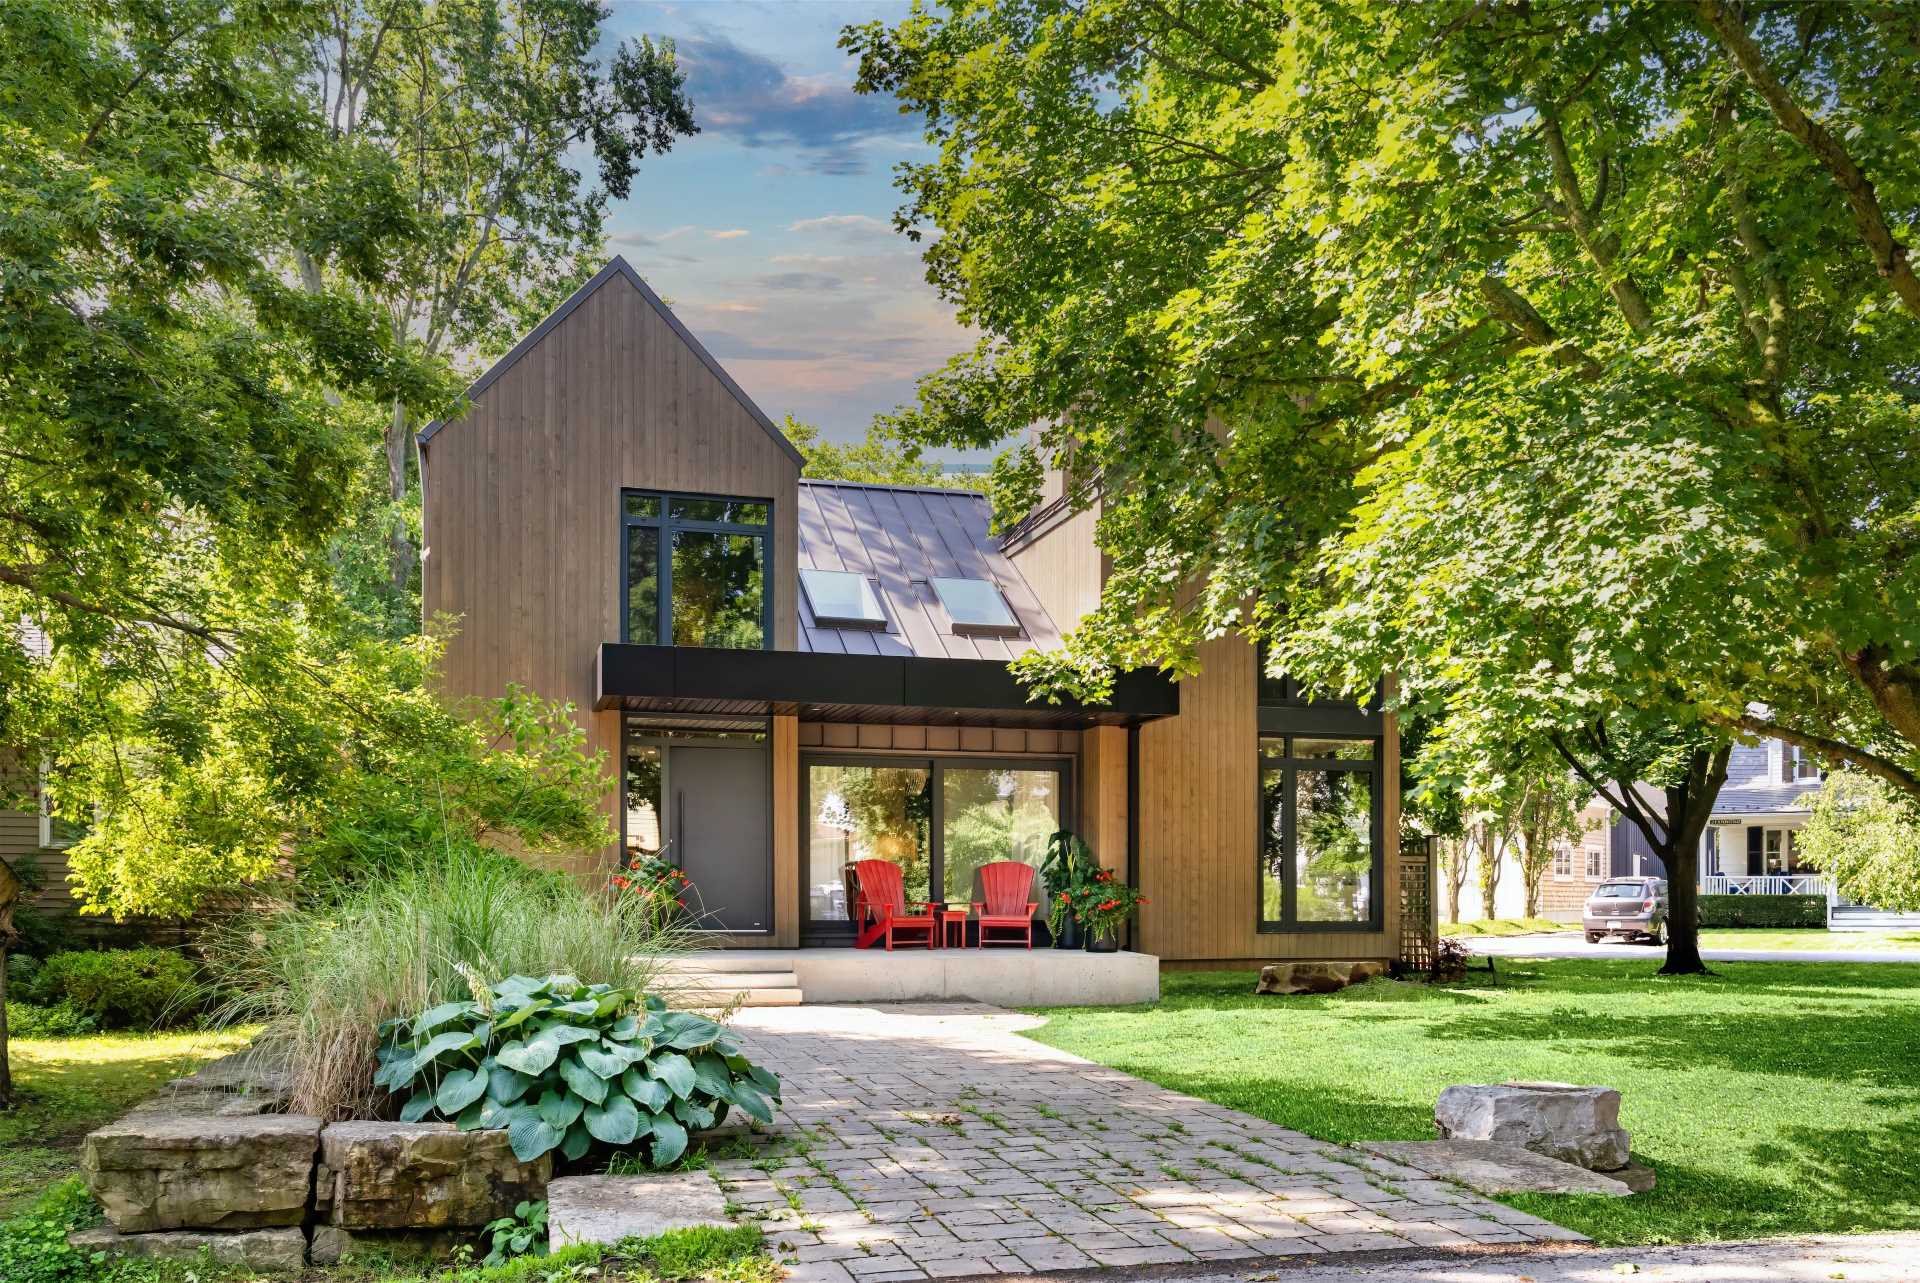 This 1980s home was transformed to include Scandinavian influence externally, and playful sophistication within, while neutral wood tones found in the vertical exterior siding, creates an intimate connection with its scenic lakeside locale.